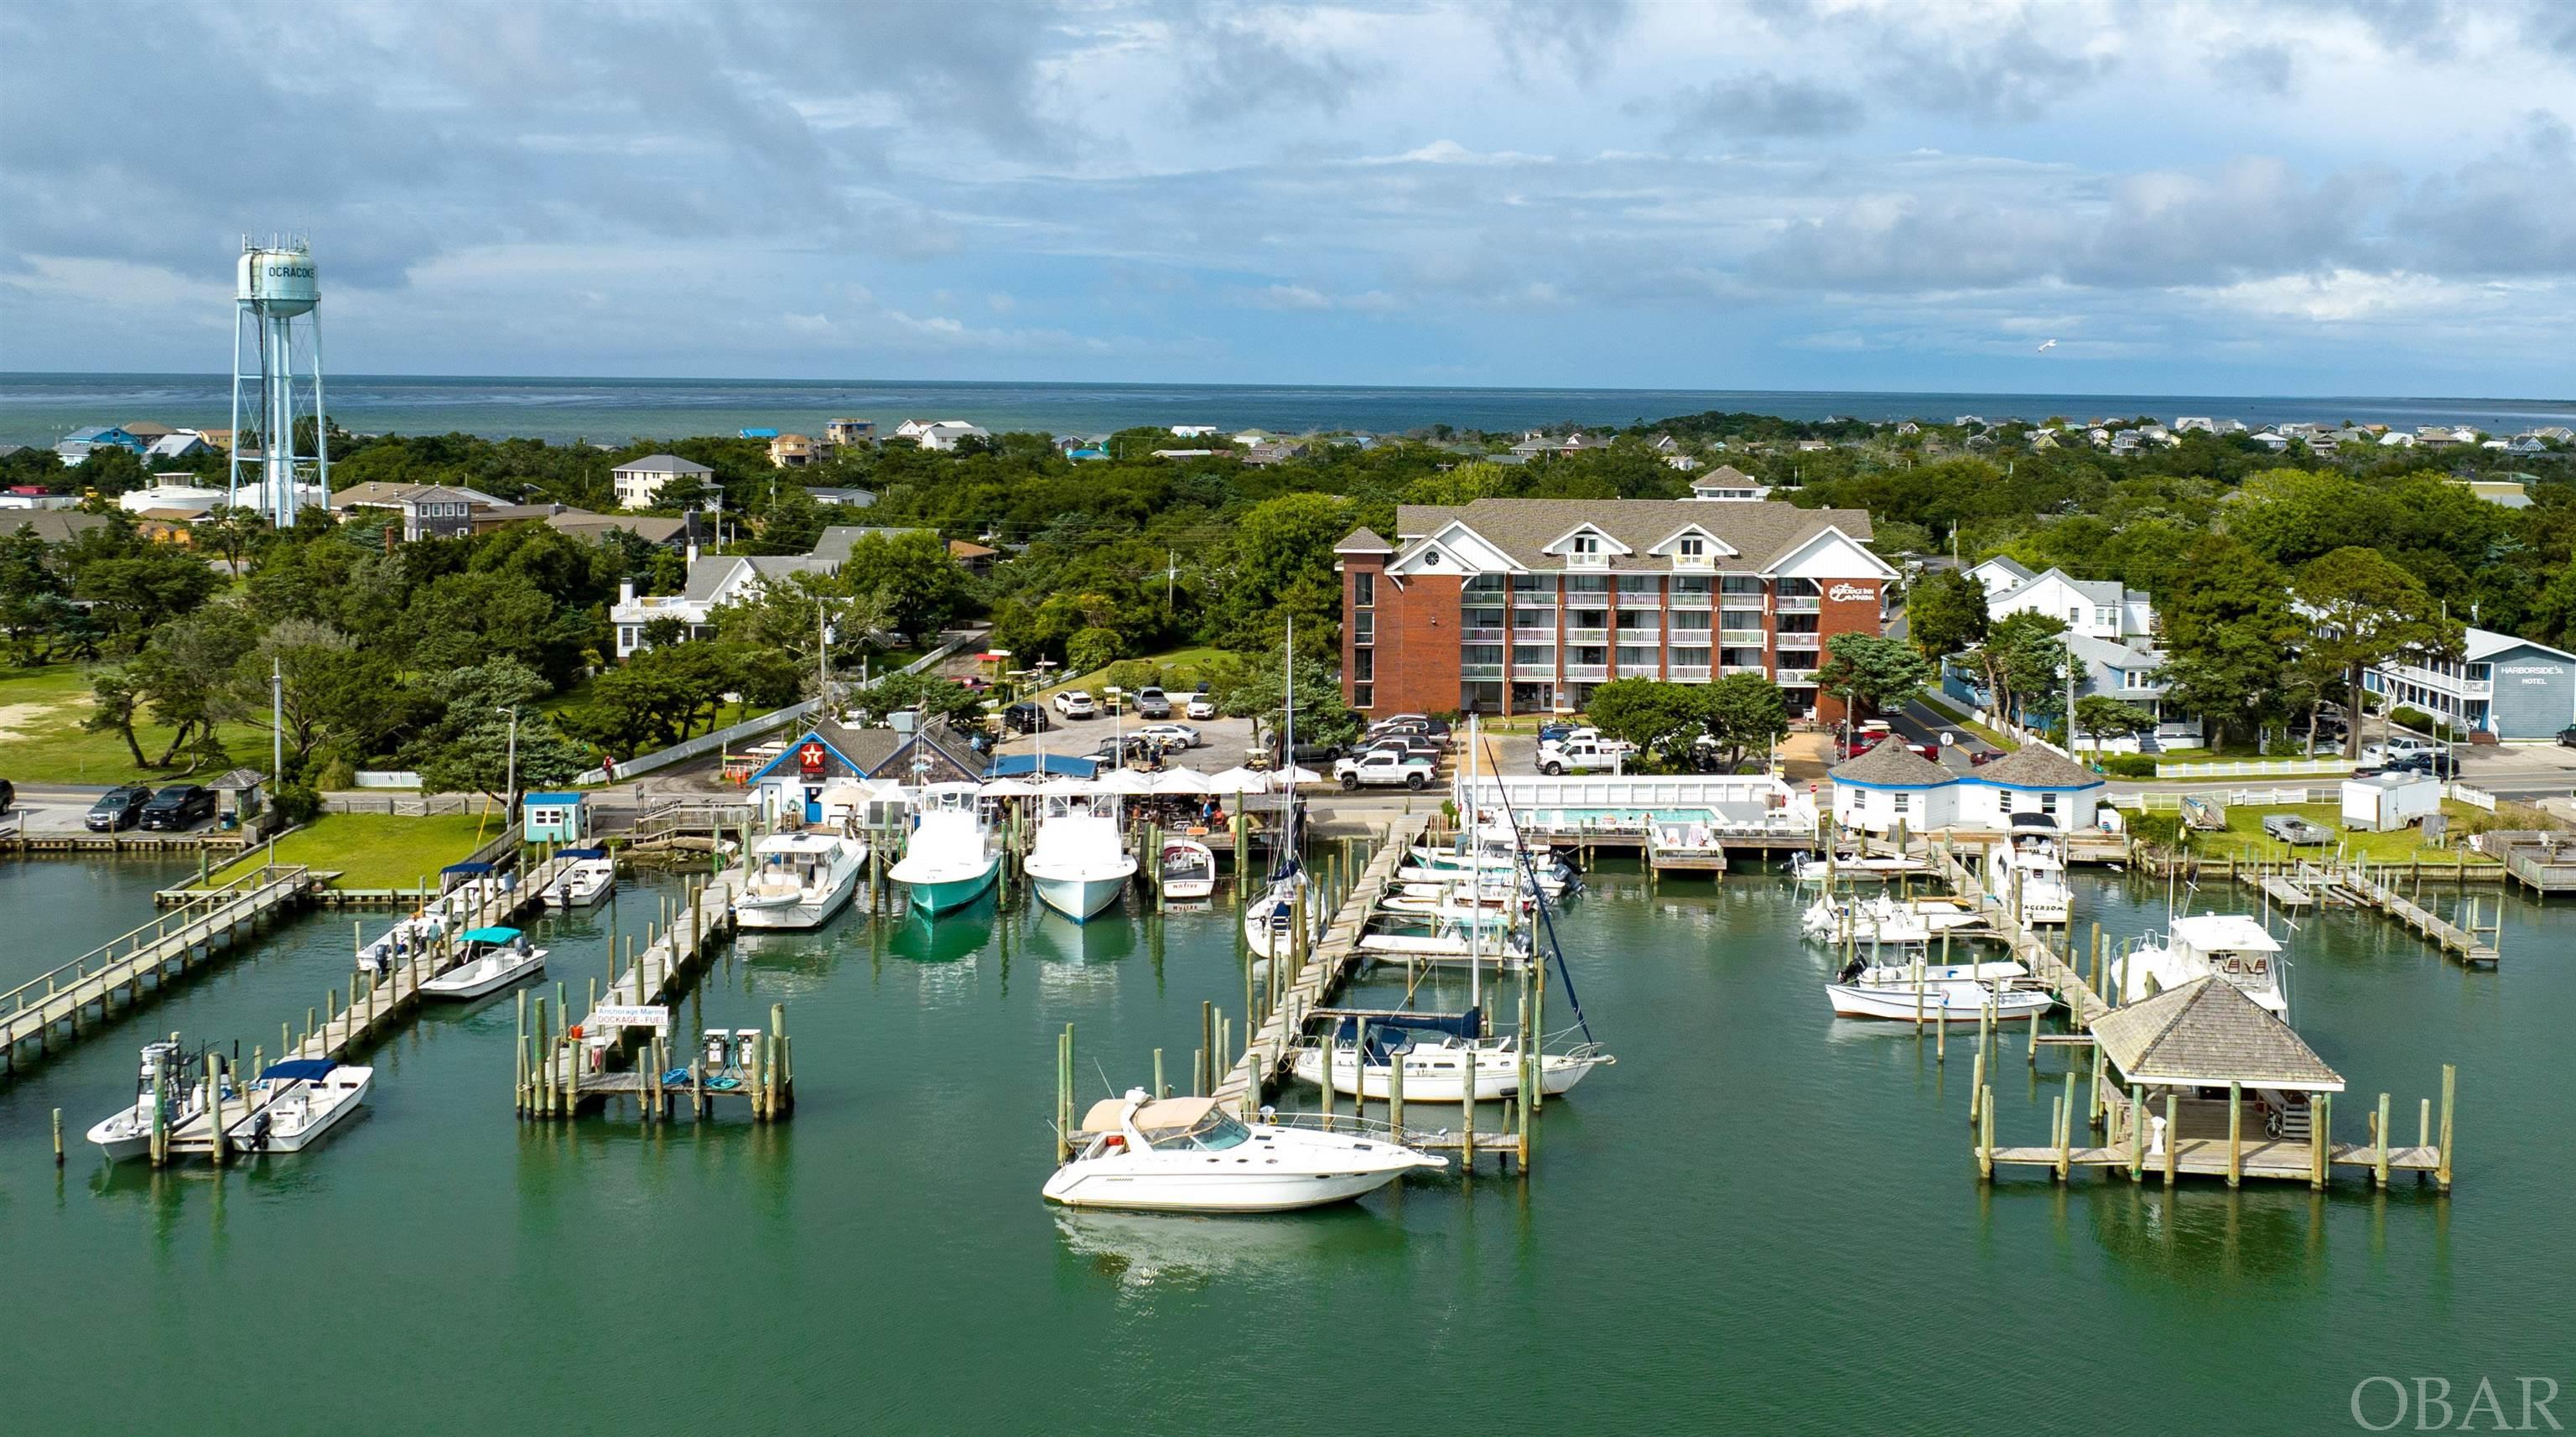 The Anchorage Inn, a 4 story brick and mortar hotel featuring 37 rooms, is a well known staple of Ocracoke's harborfront for over 40 years. Its location, perched above Silver Lake, provides views of awe inspiring sunsets that brings back guests year after year. Two large suites with full kitchens and private walk out balconies claim the uppermost floor. Harbor front pool with composite decking. Totally turn-key investment property. 4 bedroom house behind hotel houses on site staff and conveys. Full service diesel generator powers entire facility. Self manage or lease to property management company. Two docks are included with 27+/- boat slips along 120'+/- of harbor frontage. A commercial lease space on Silver Lake and main thoroughfare conveys providing passive income - current tenant is Island Golf Carts. Major maintenance items of shingle roof, exterior paint, and septic drain fields recently completed. This investment opportunity is once in a lifetime and should not be passed on. Package deal available for combined purchase of Ocracoke Marina and Anchorage Inn. Financial data available for qualified buyers. Contact your agent for more information today.